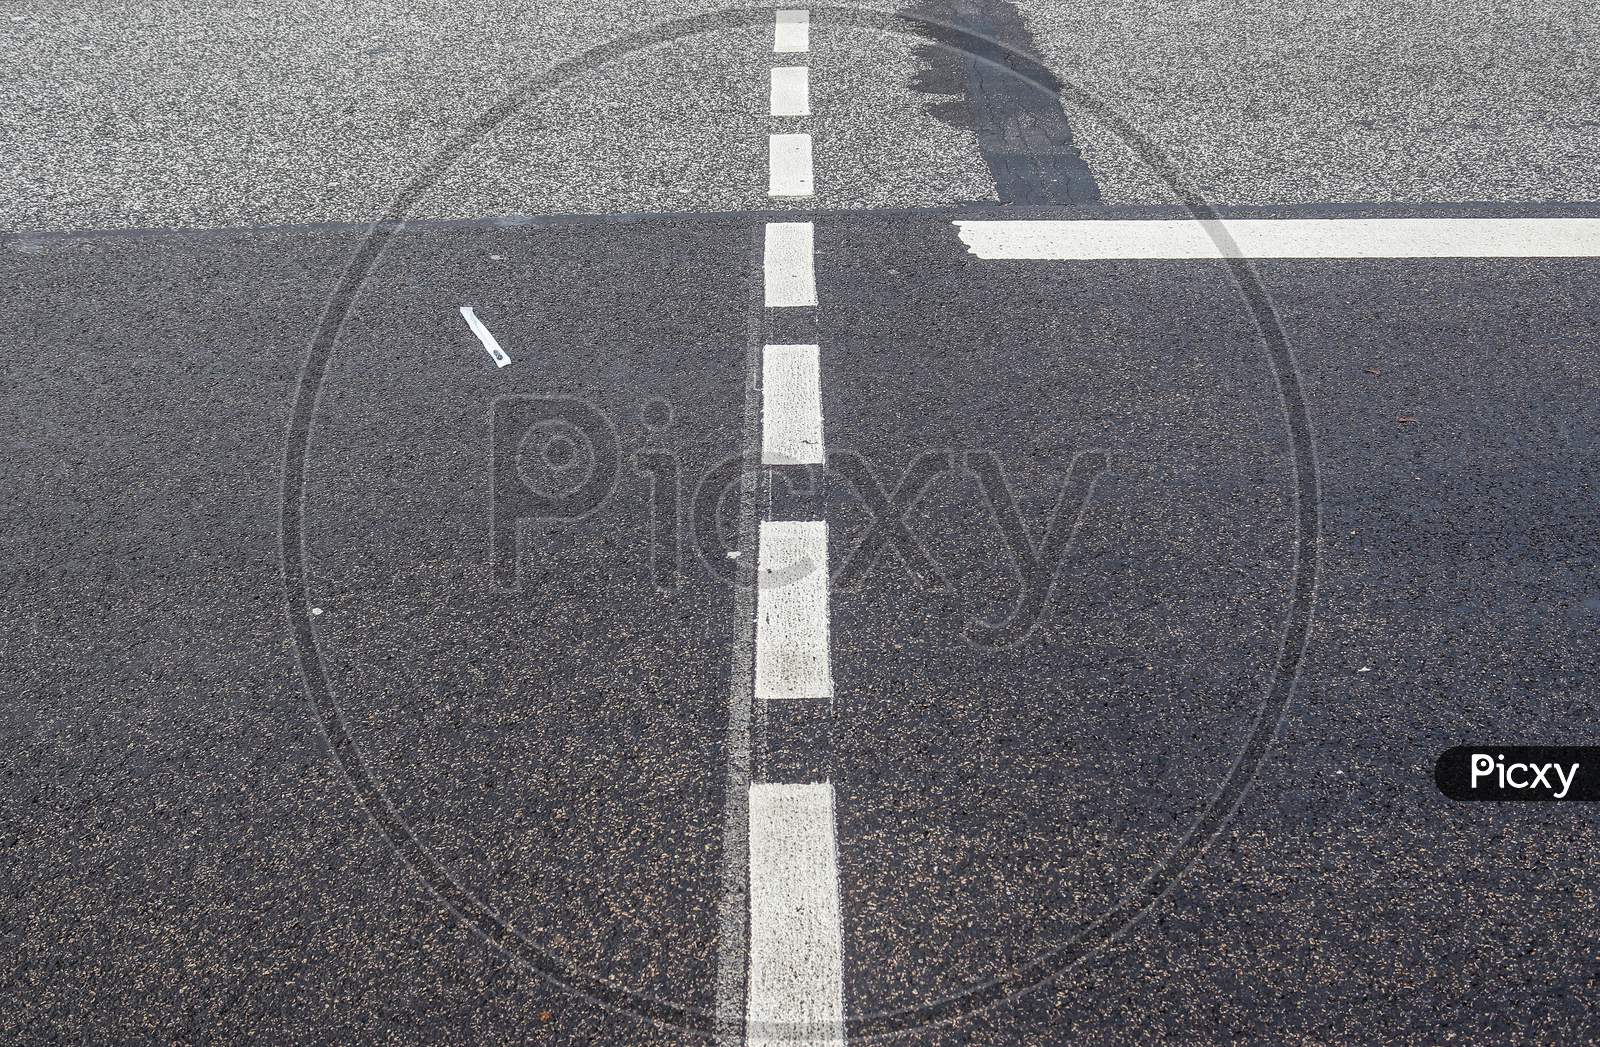 White lines and symbols on the asphalt of roads all over the world